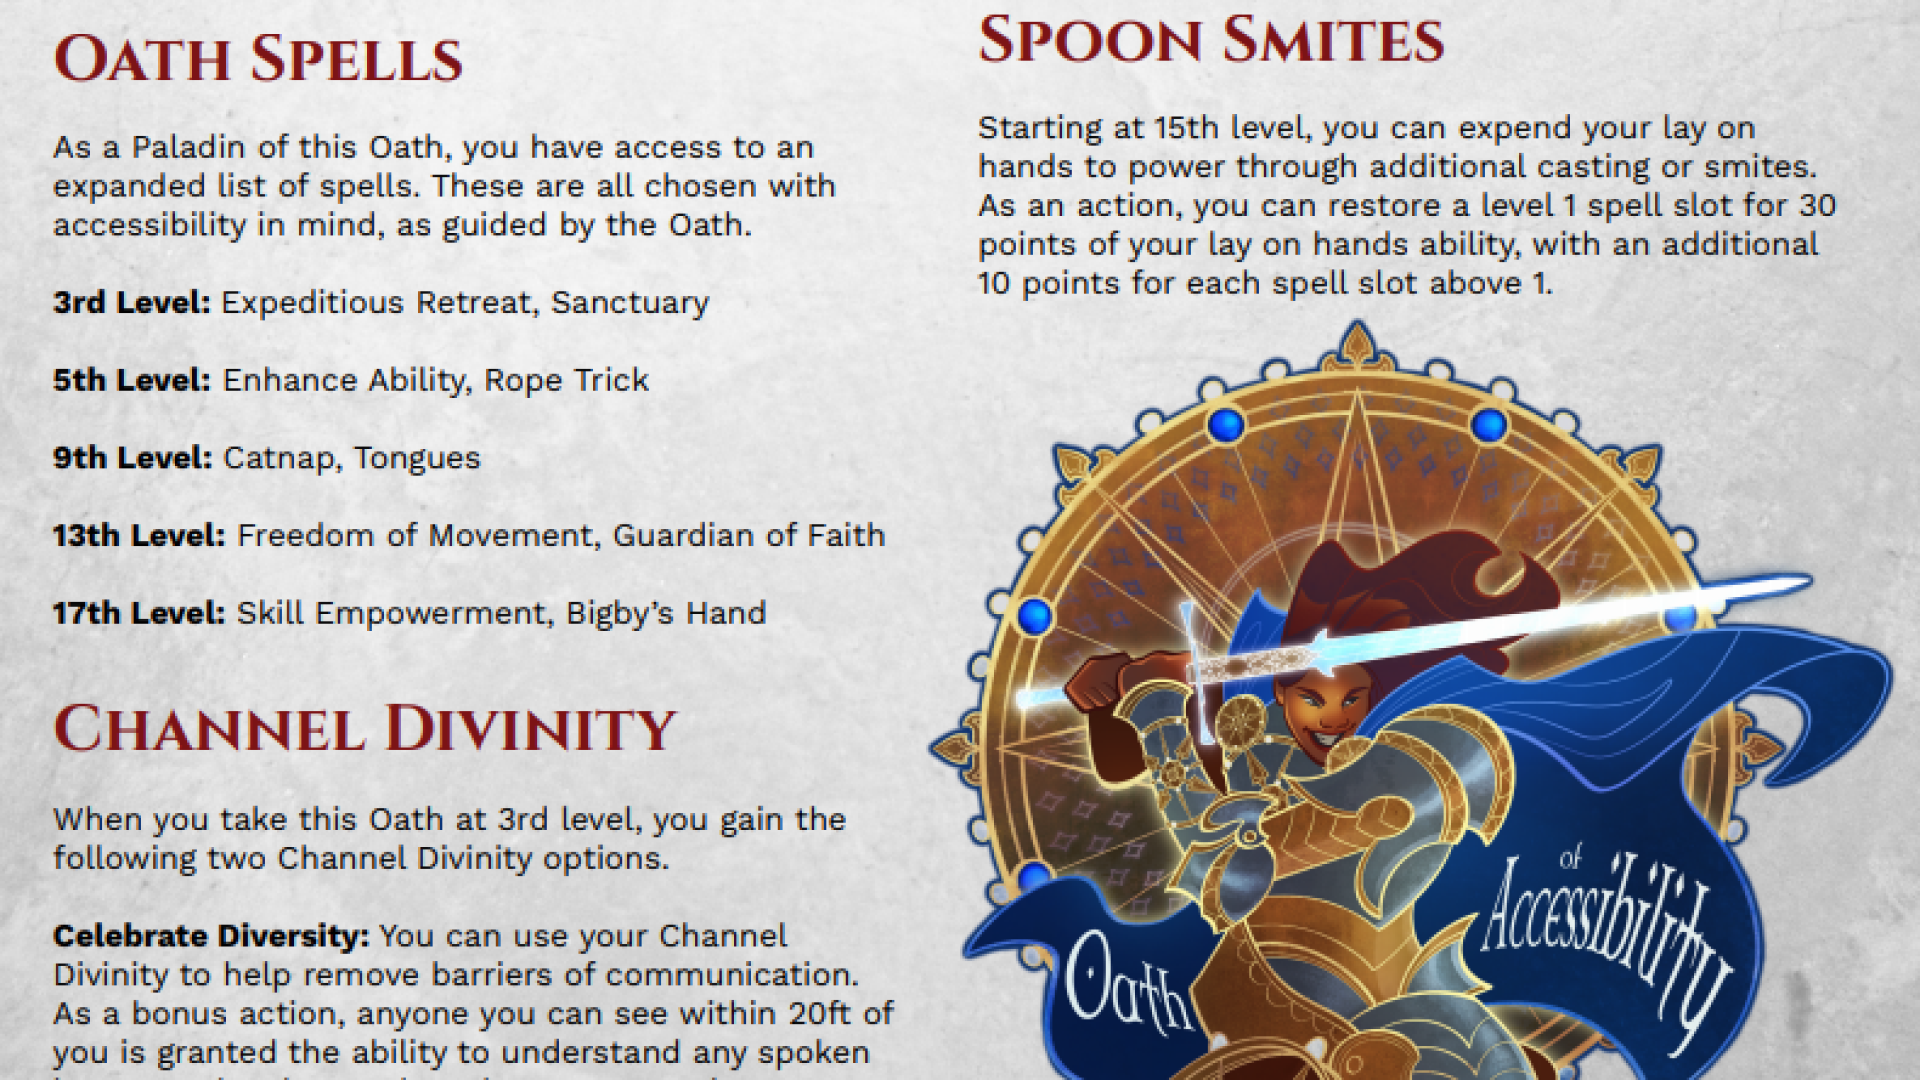 Image for Disability-focused Dungeons & Dragons supplements raise funds for Bristol Children's Hospital Play Team